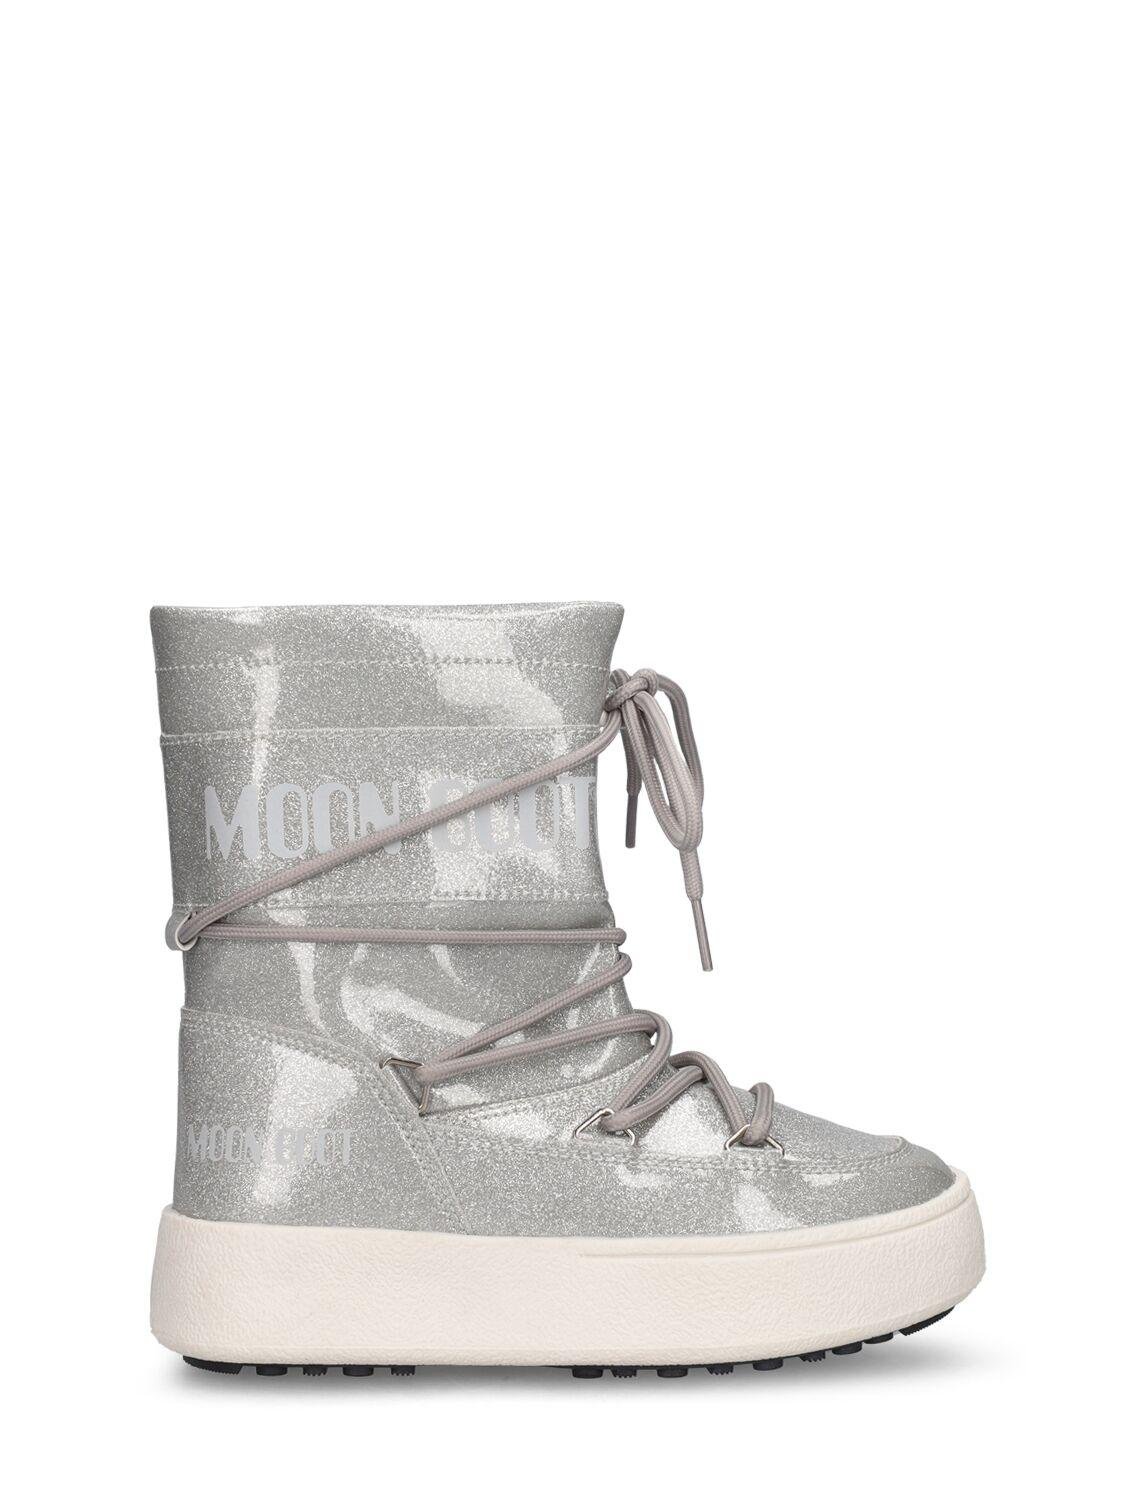 Nylon Glitter Ankle Snow Boots by MOON BOOT